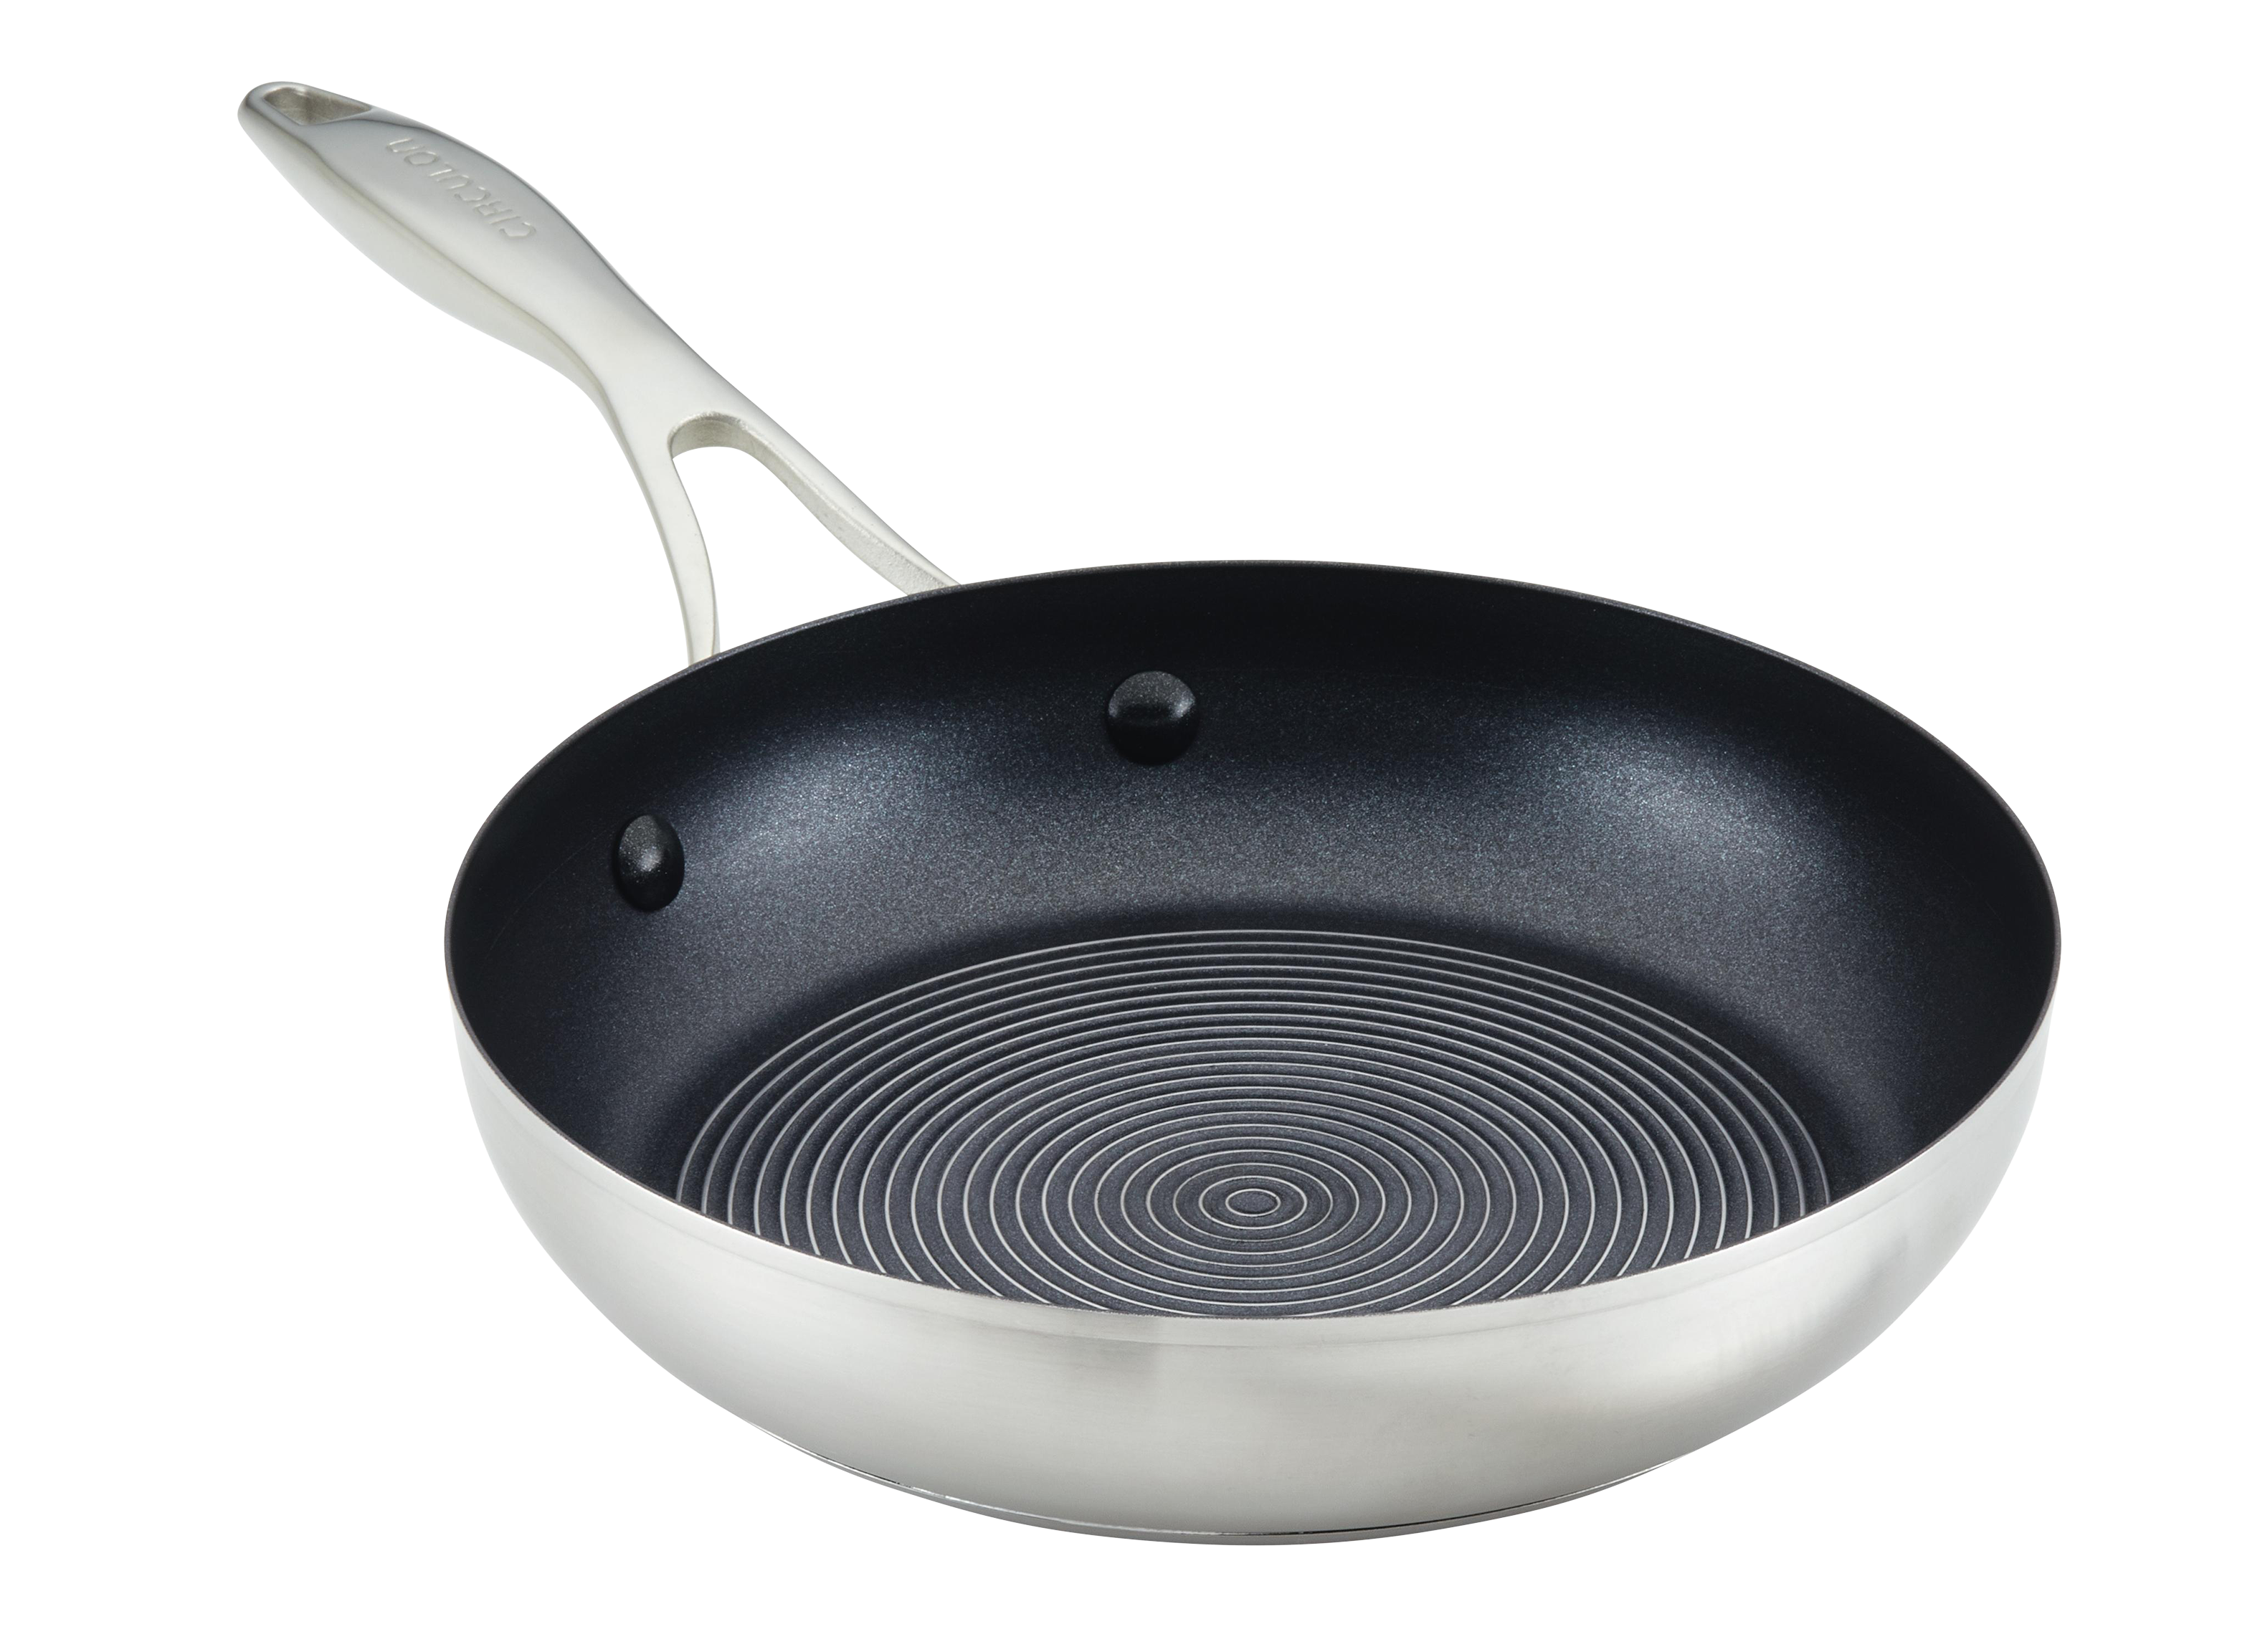 https://crdms.images.consumerreports.org/prod/products/cr/models/404683-frying-pans-nonstick-circulon-steelshield-s-series-10023250.png